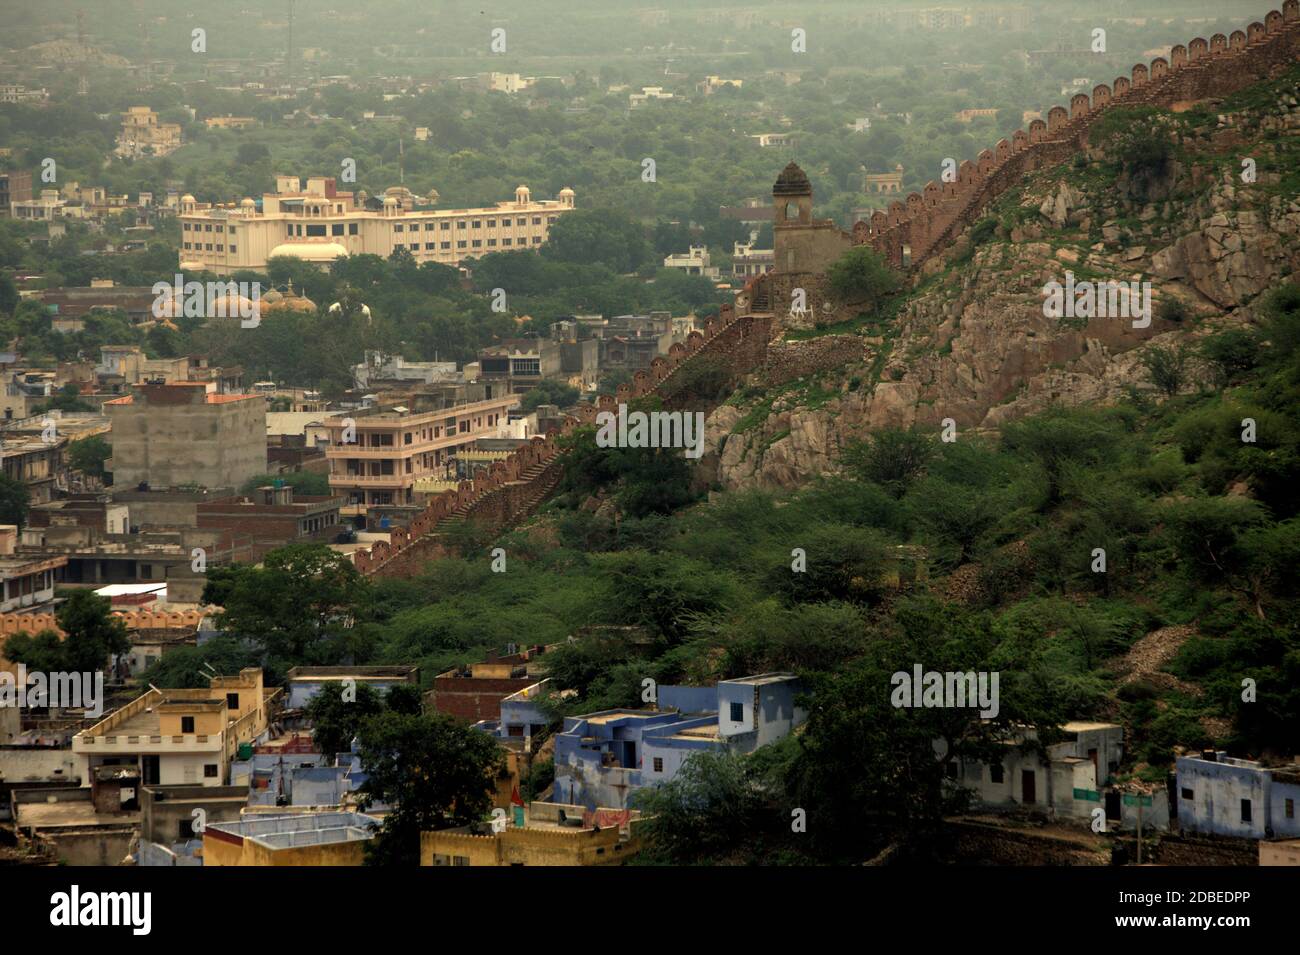 View of Amer town seen from Amer Fort in Rajasthan, India. Stock Photo